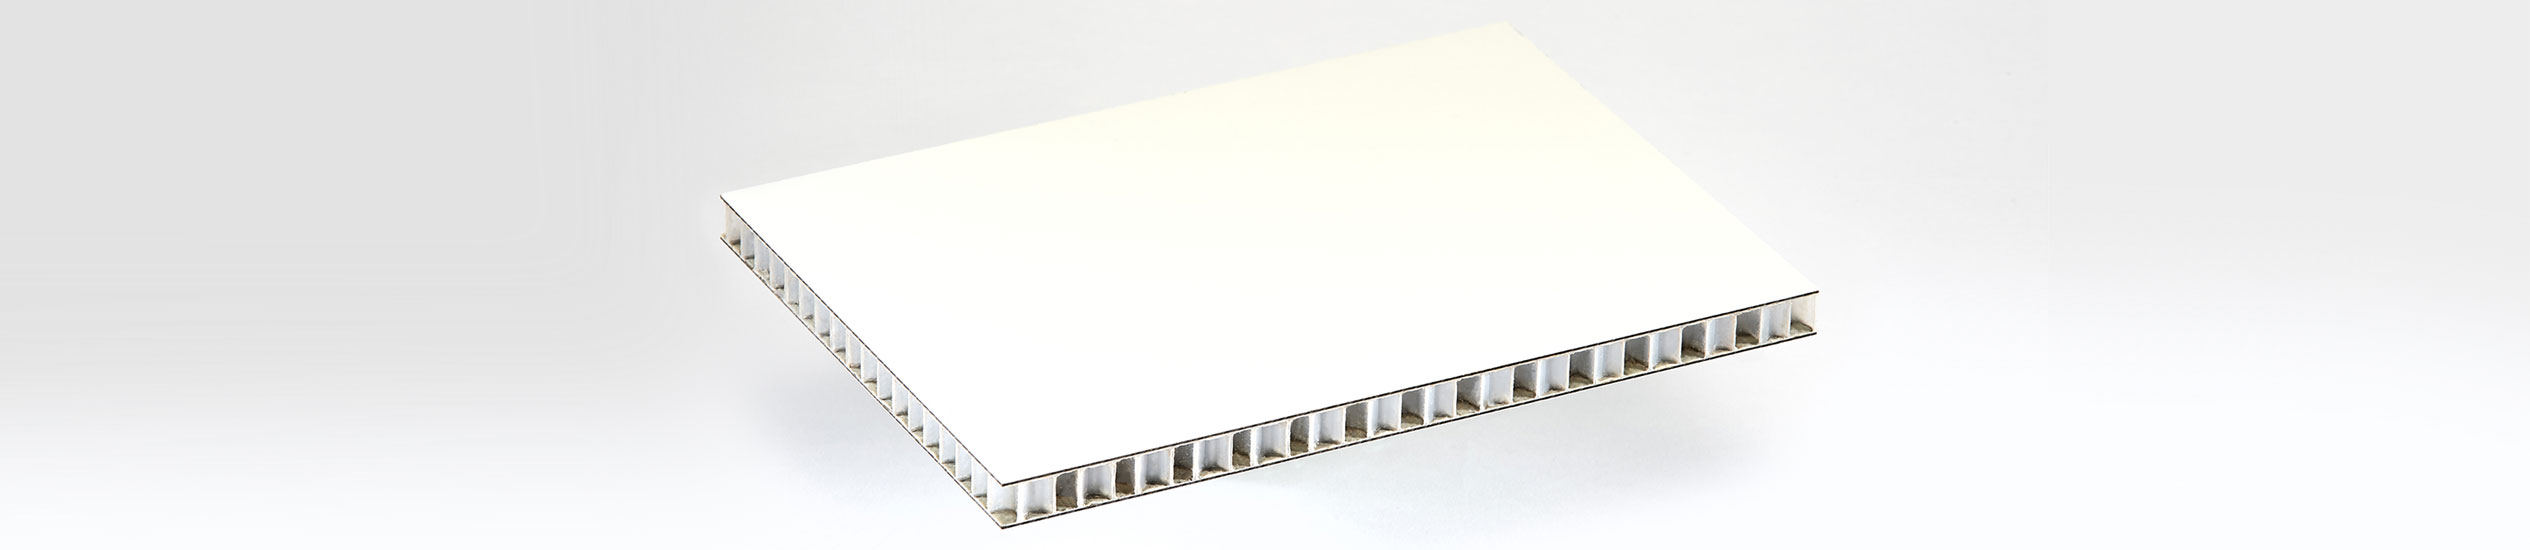 COMPOCEL® HP is a sandwich panel with a face in high pressure laminate and a core in polypropylene honeycomb. It offers high mechanical properties